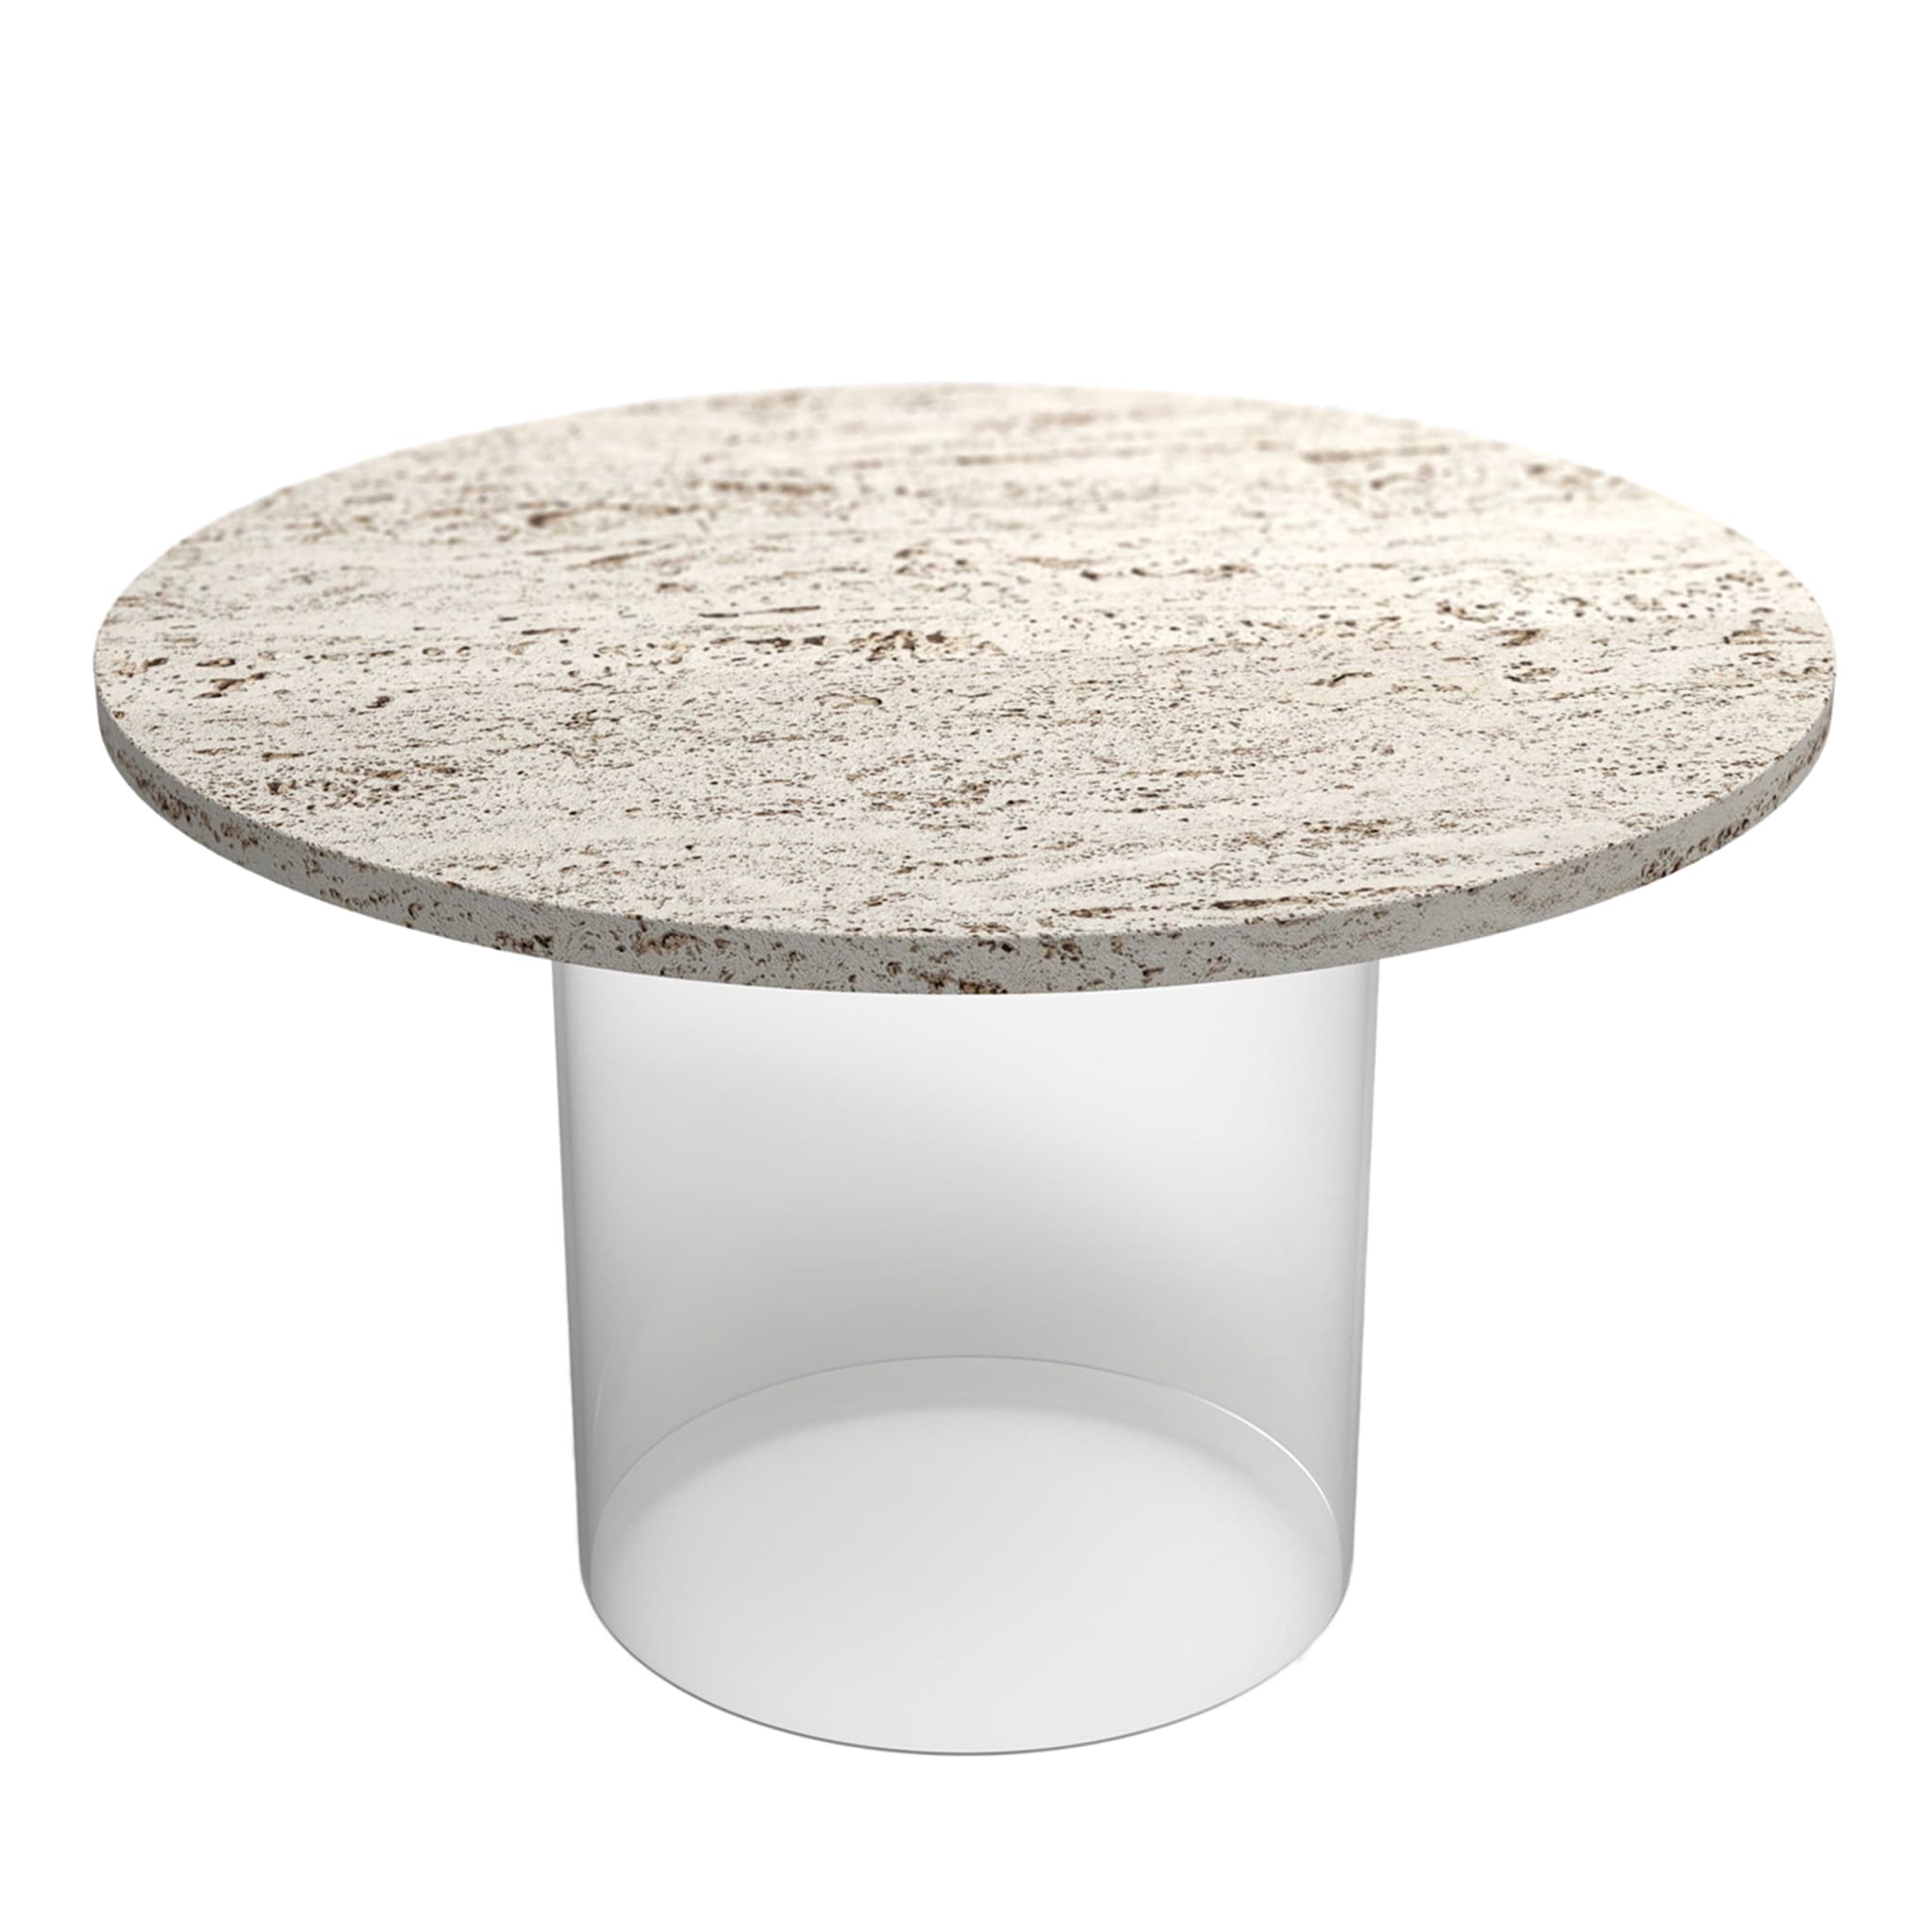 21st Century Travertine Marble Coffee Table with Wireless Charger - Main view